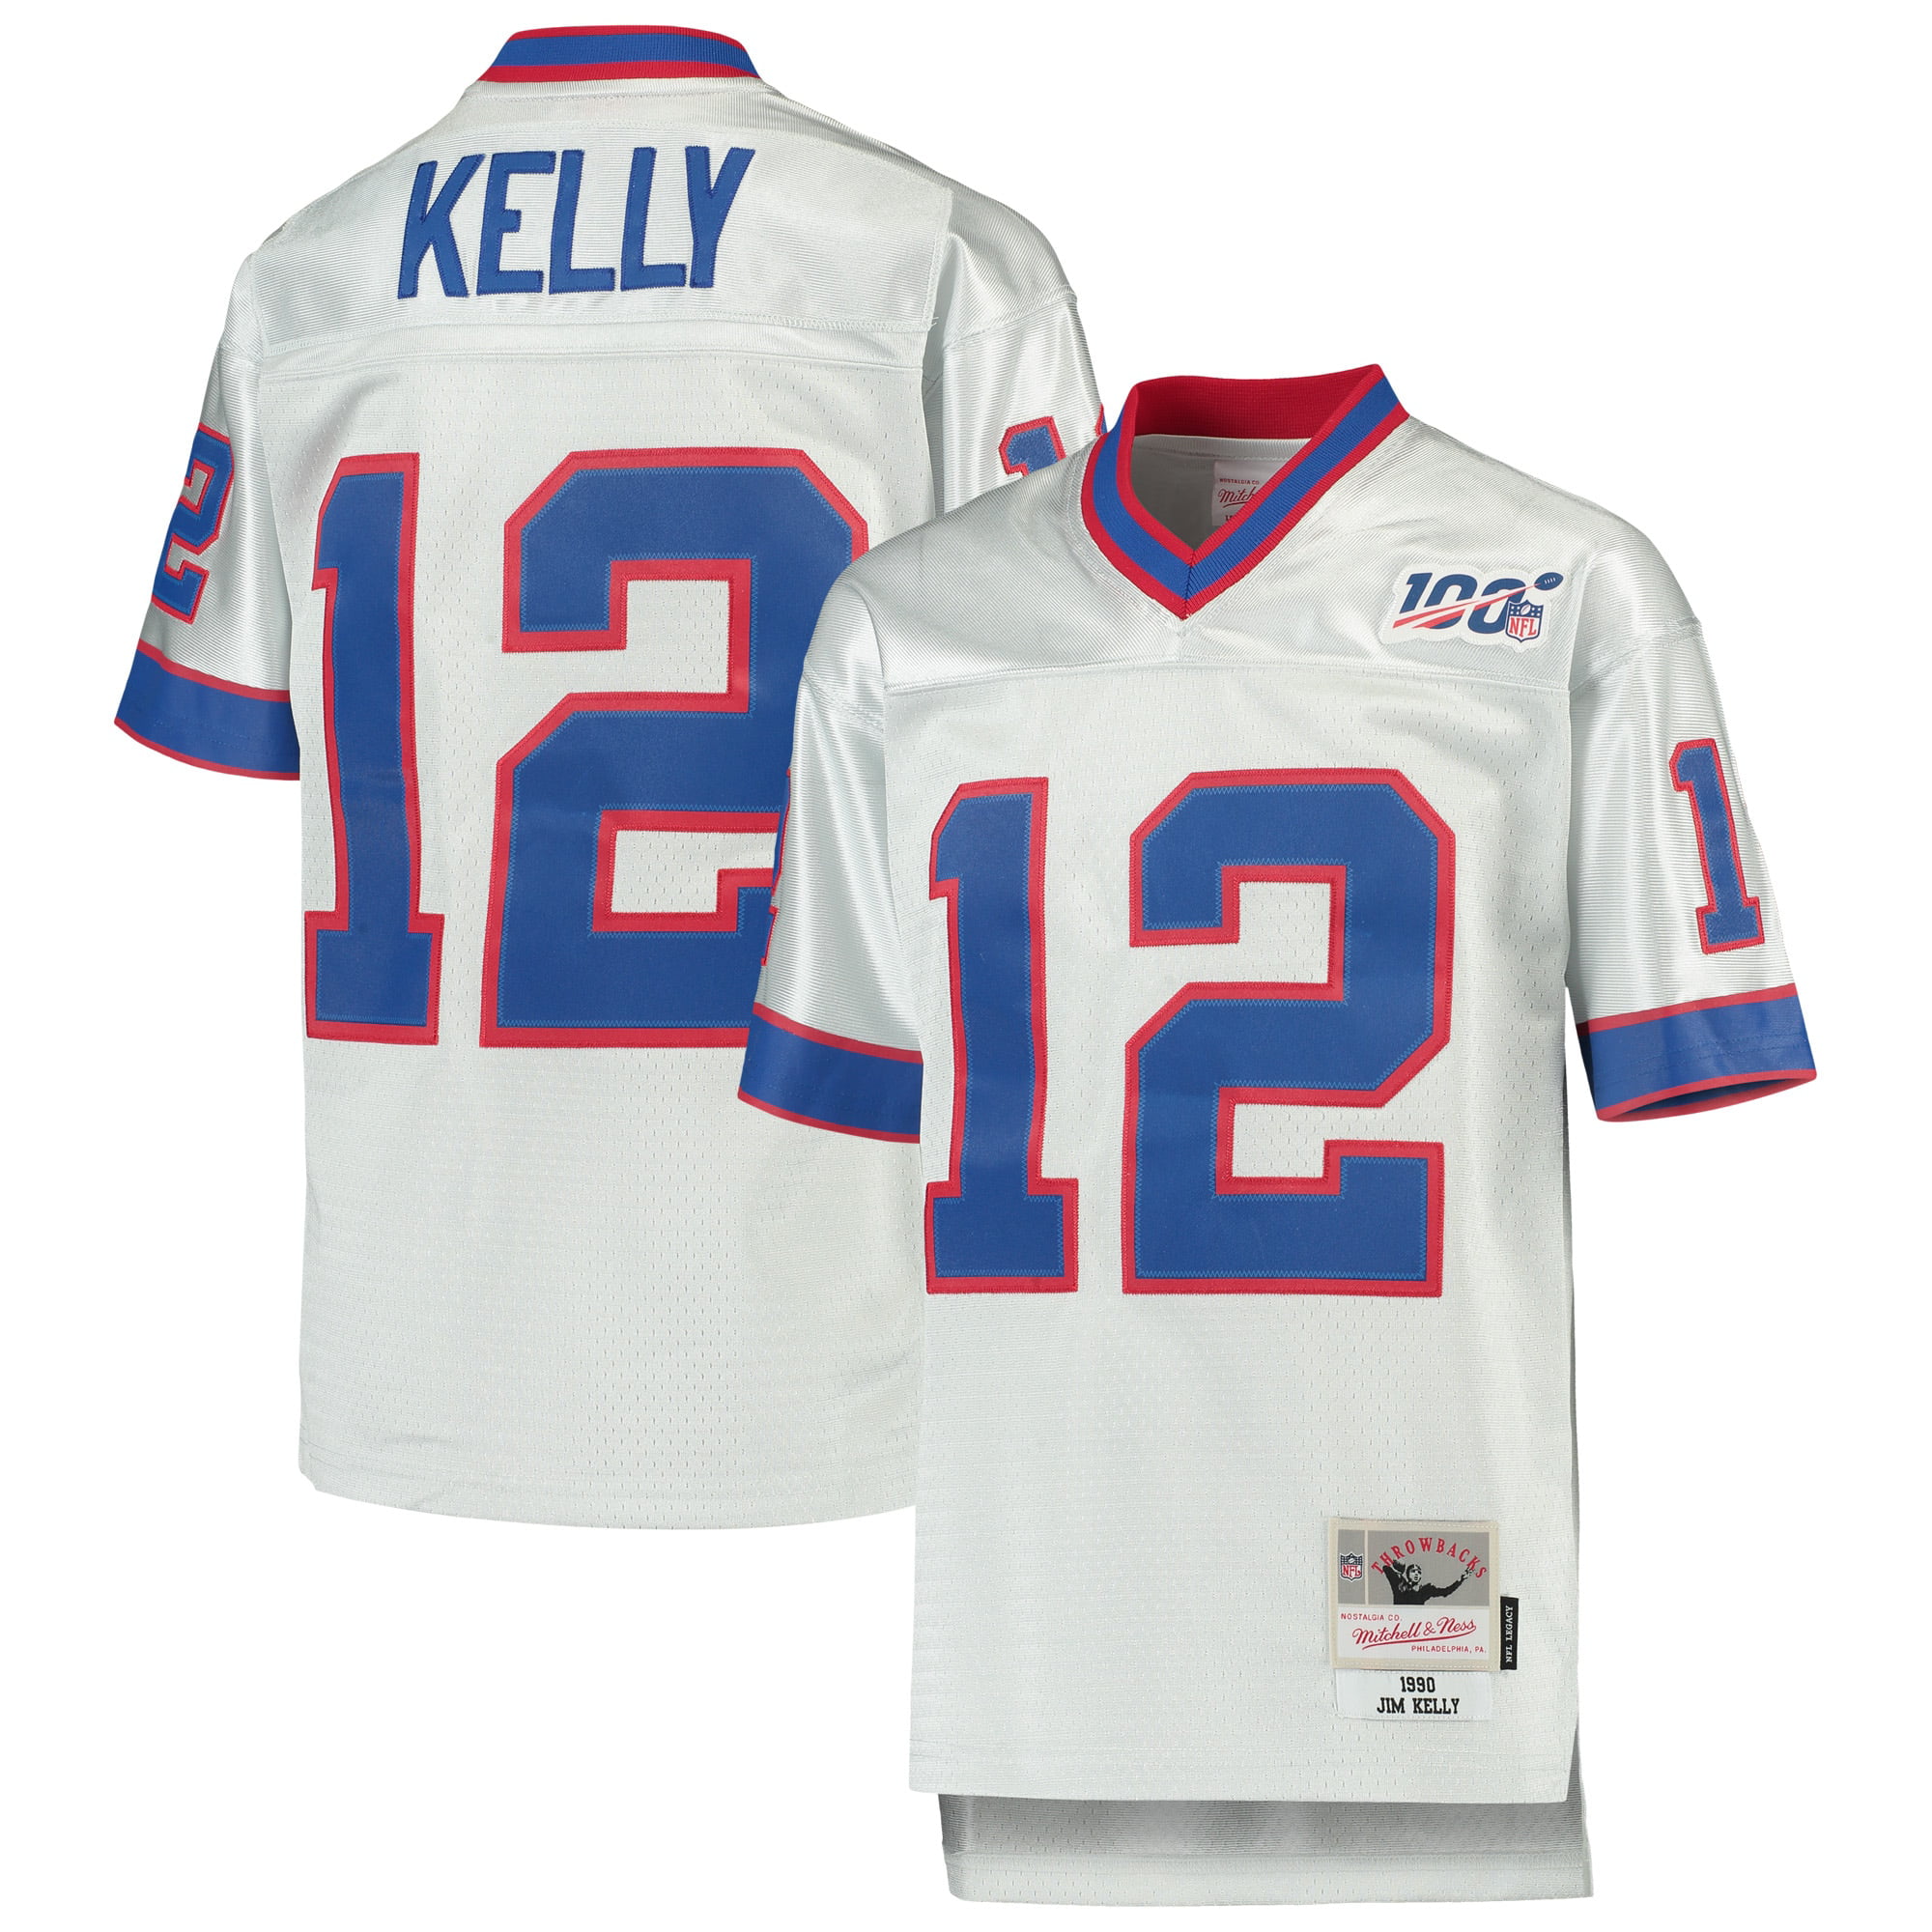 jim kelly jersey number